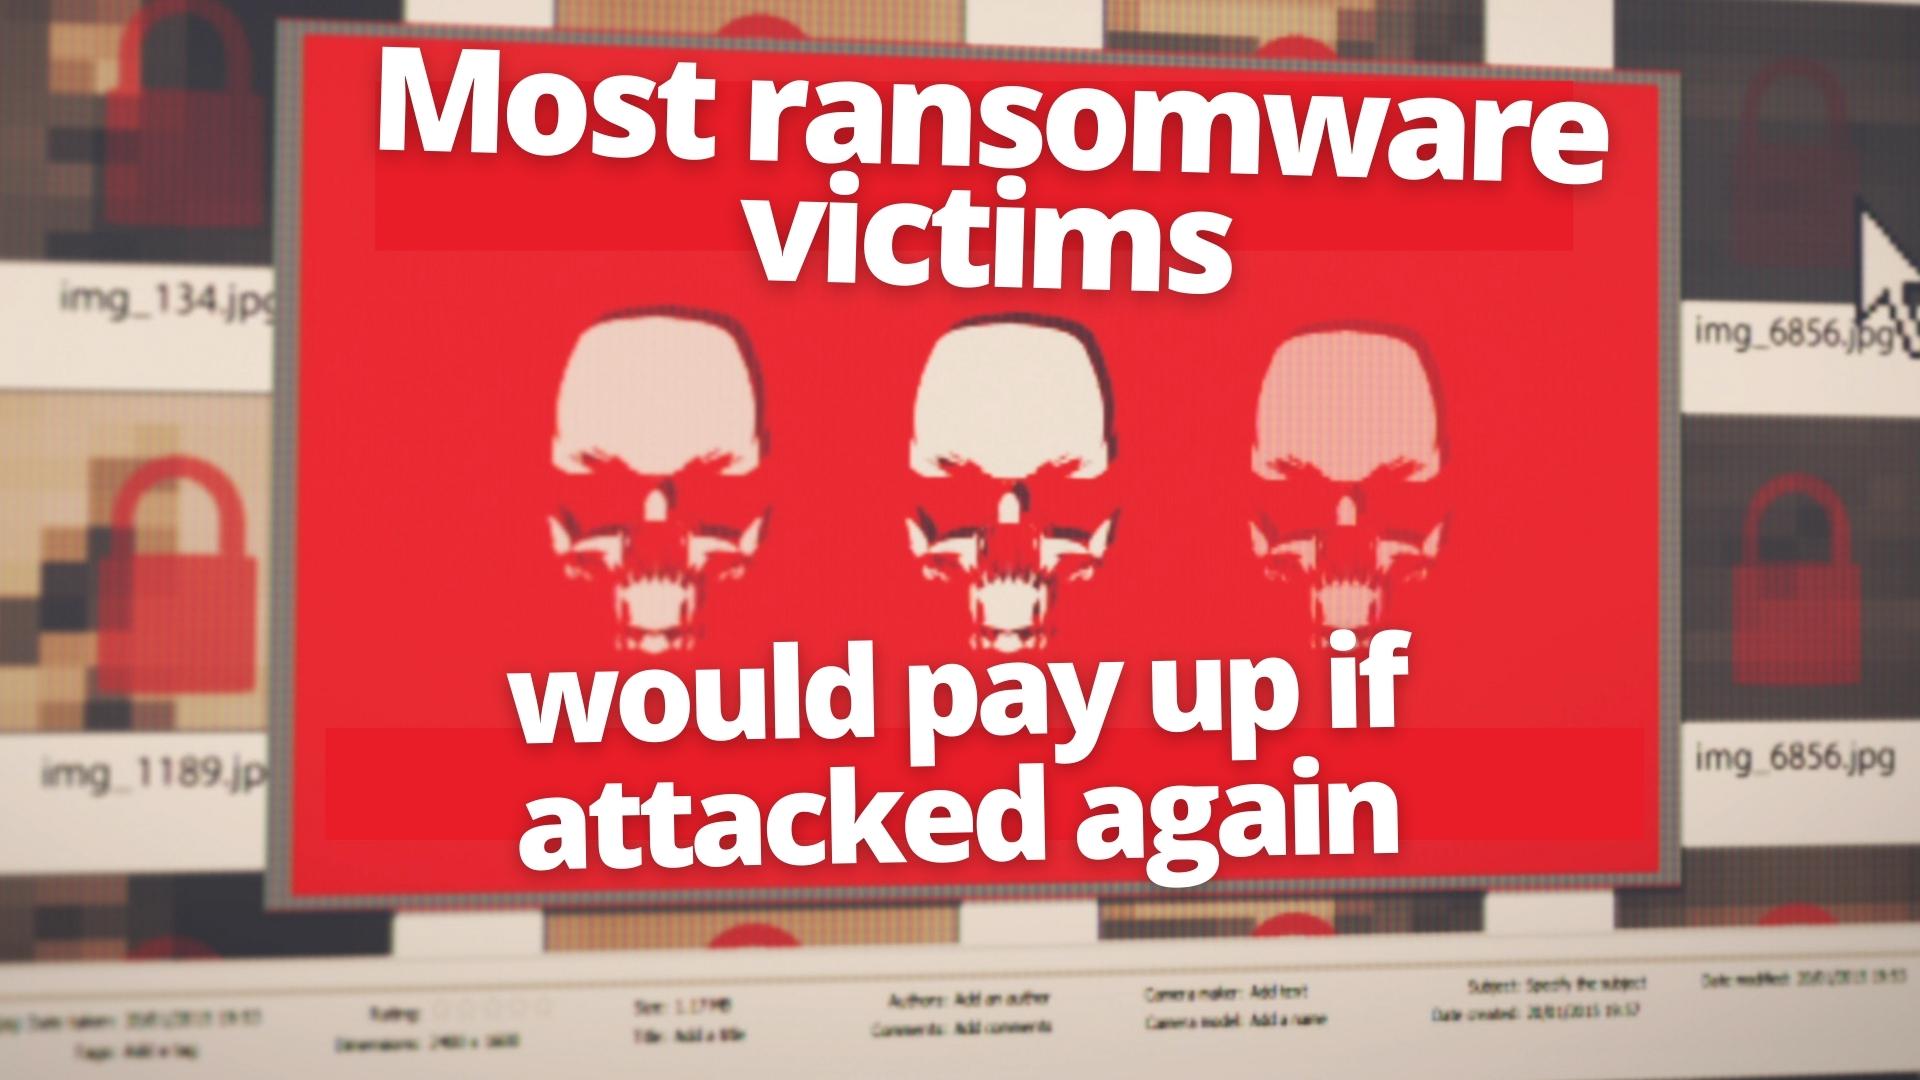 Most ransomware victims would pay up if attacked again